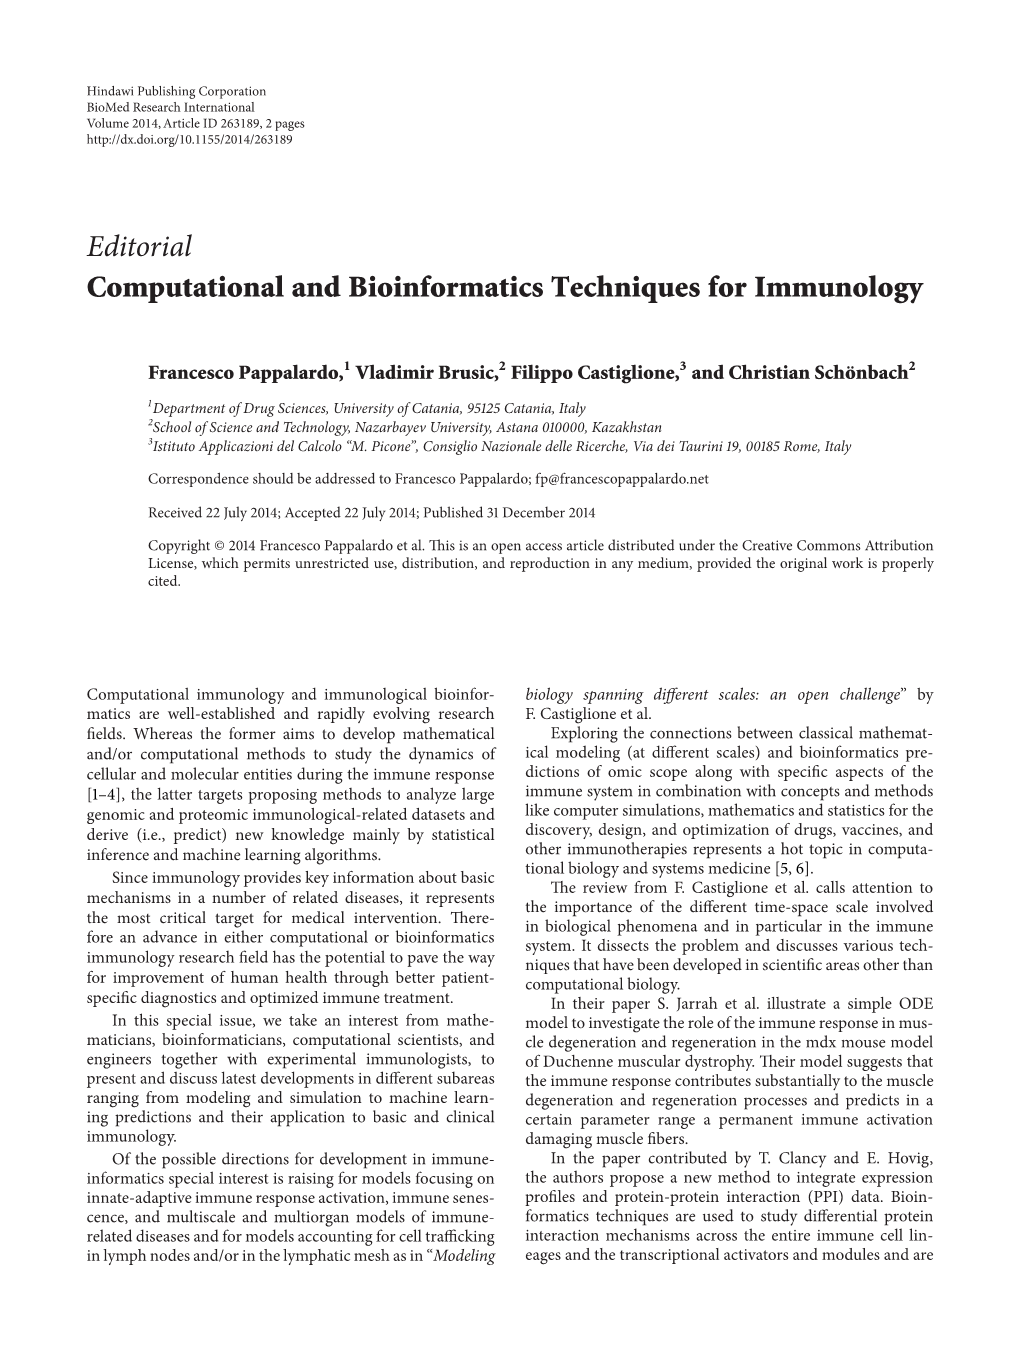 Editorial Computational and Bioinformatics Techniques for Immunology